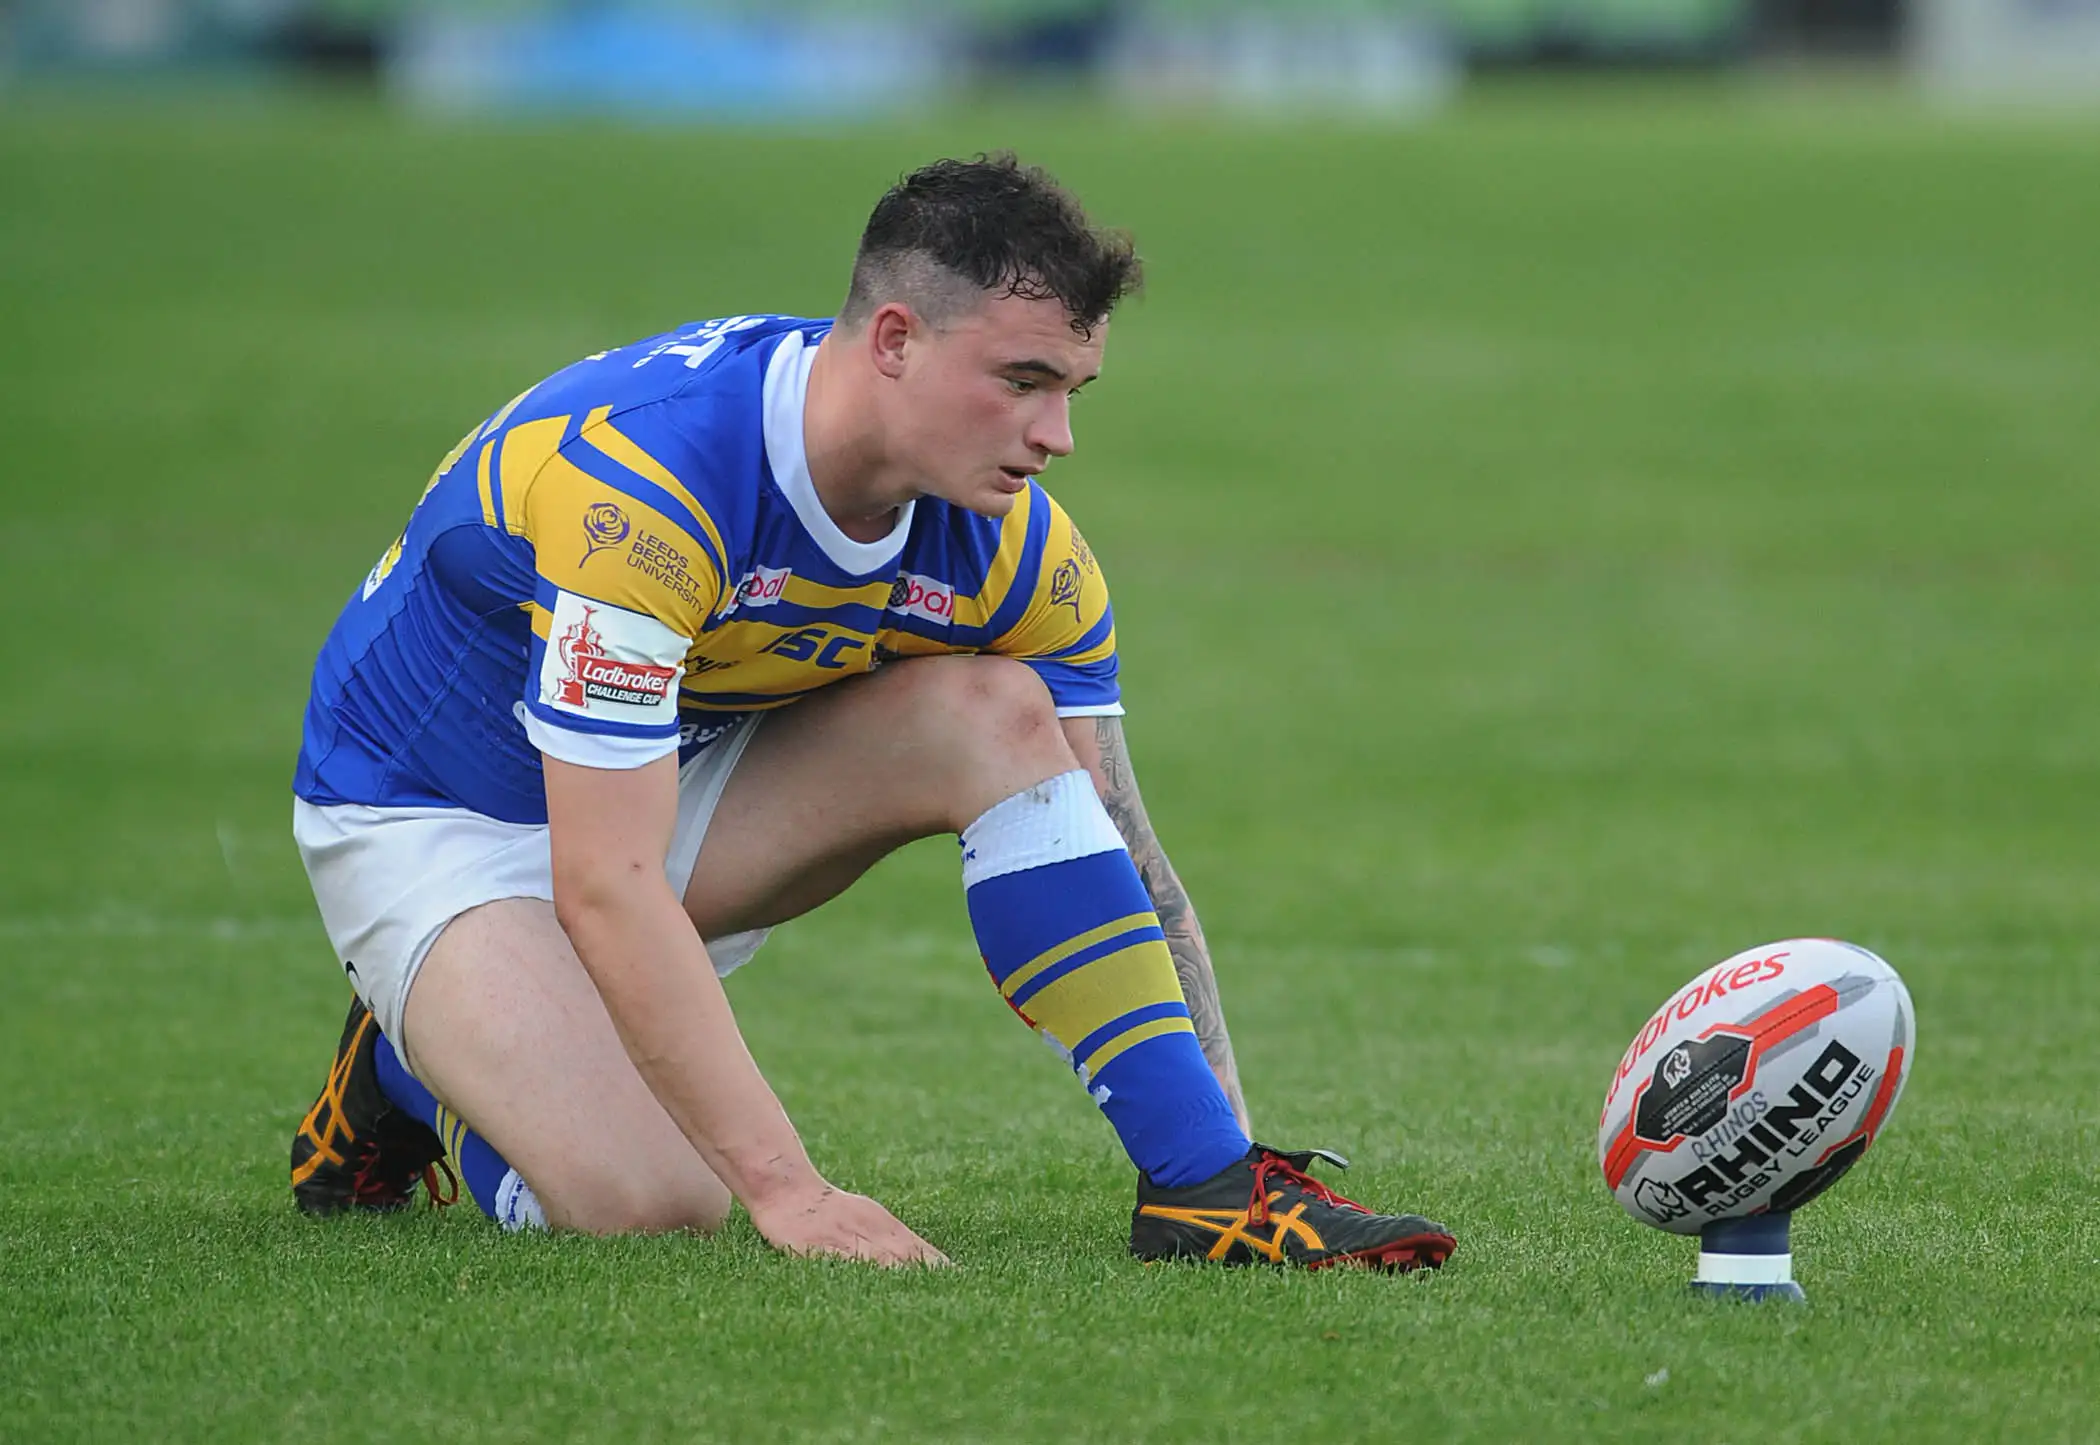 Leeds youngster Jordan Lilley joins Bradford on loan